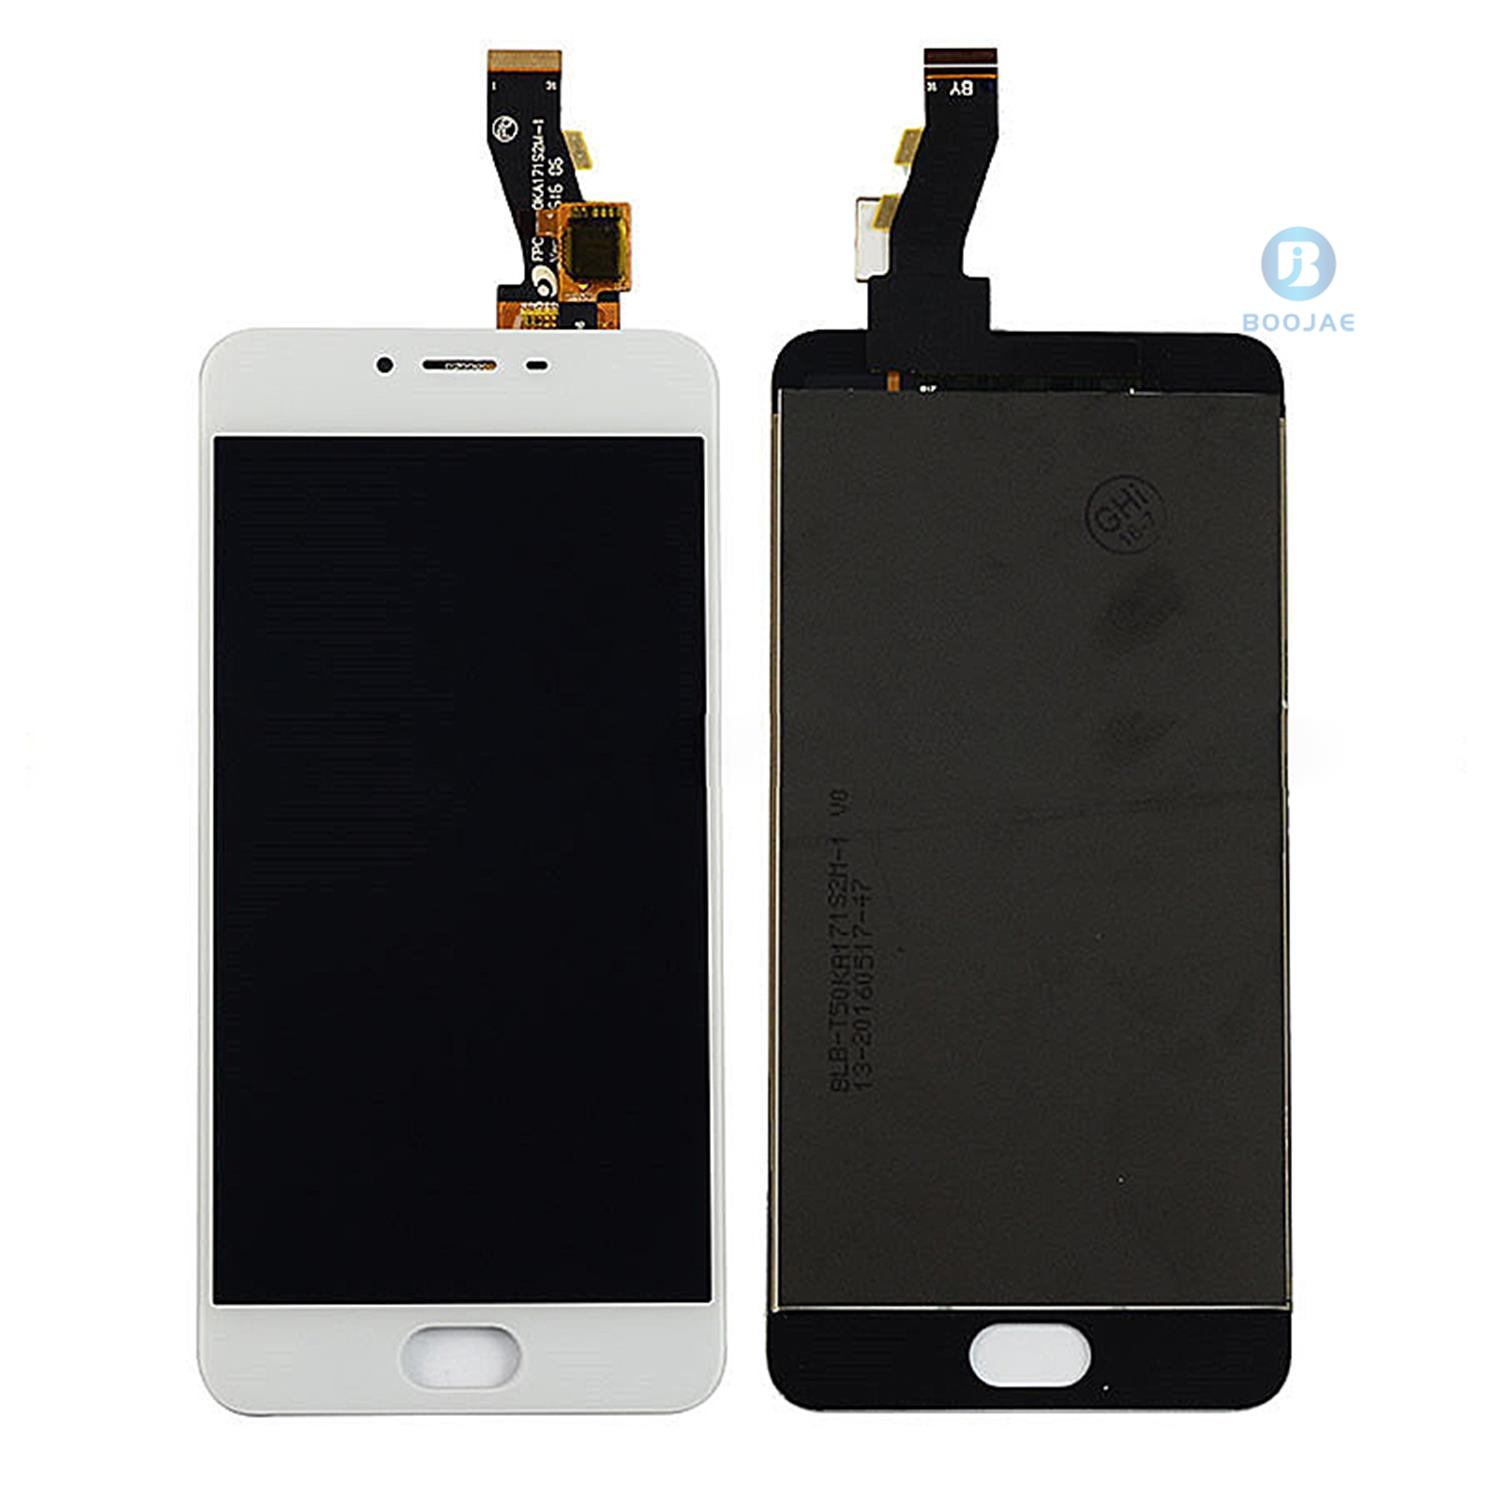 For Meizu Meilan 3S LCD Screen Display and Touch Panel Digitizer Assembly Replacement